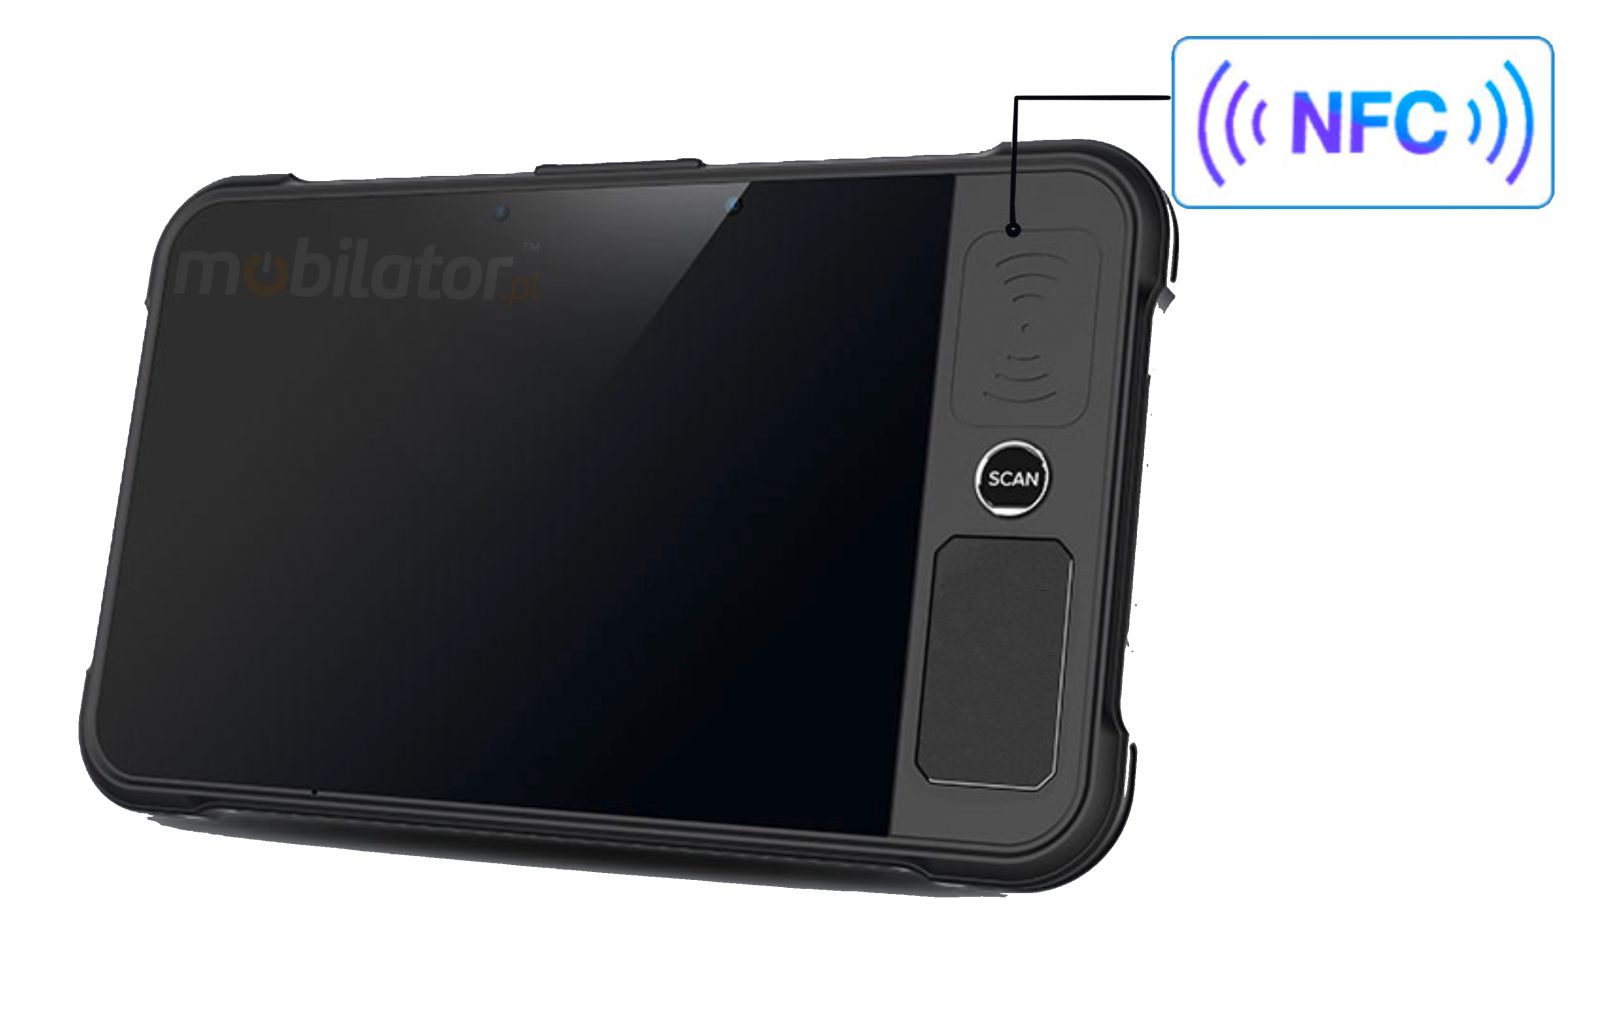 Chainway P80-PF Industrial Tablet android 9. 0 Reinforced with NFC